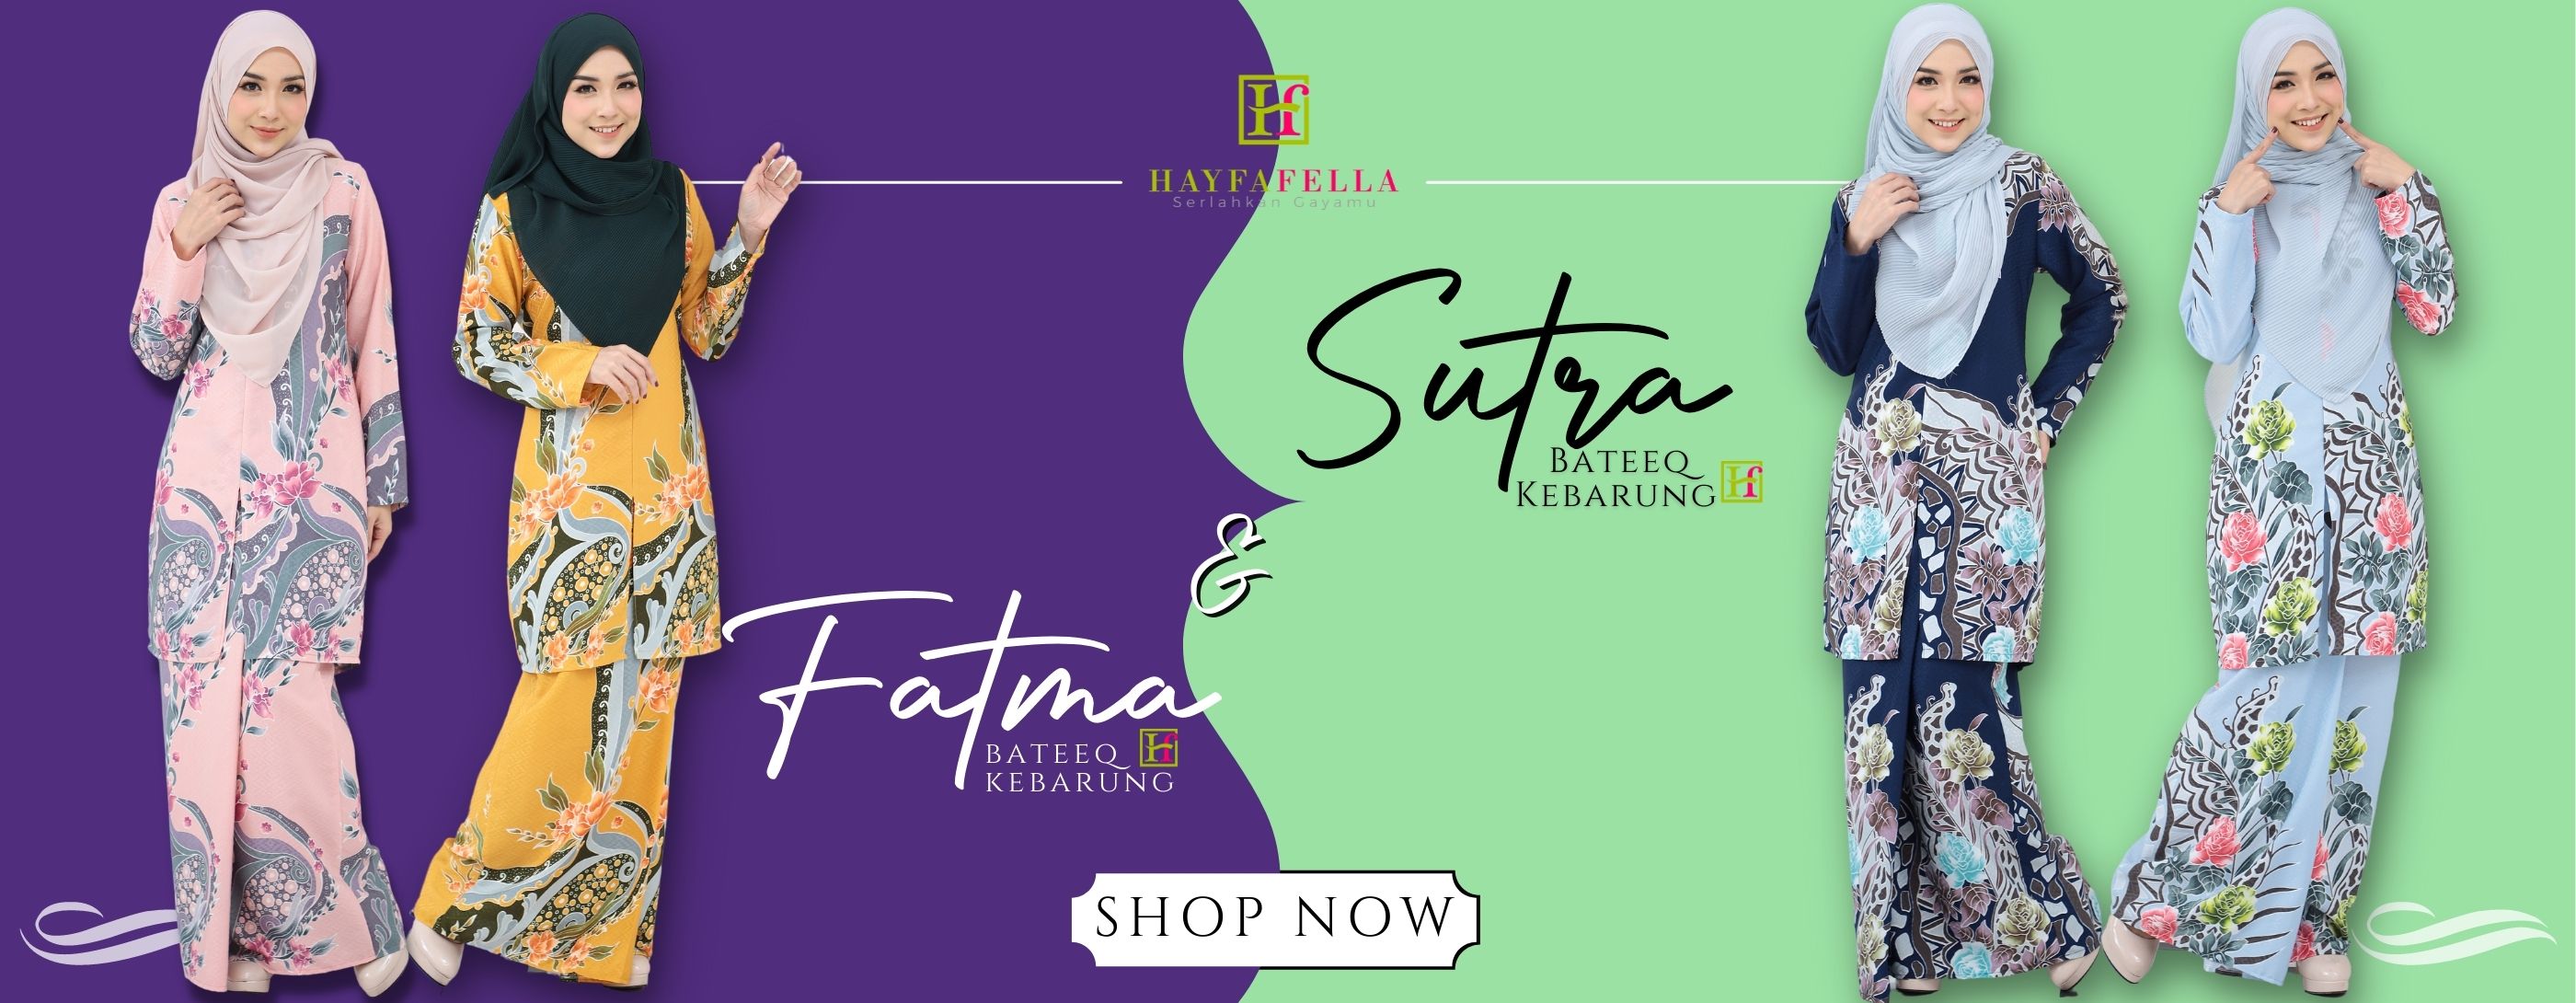 fatma and sutra